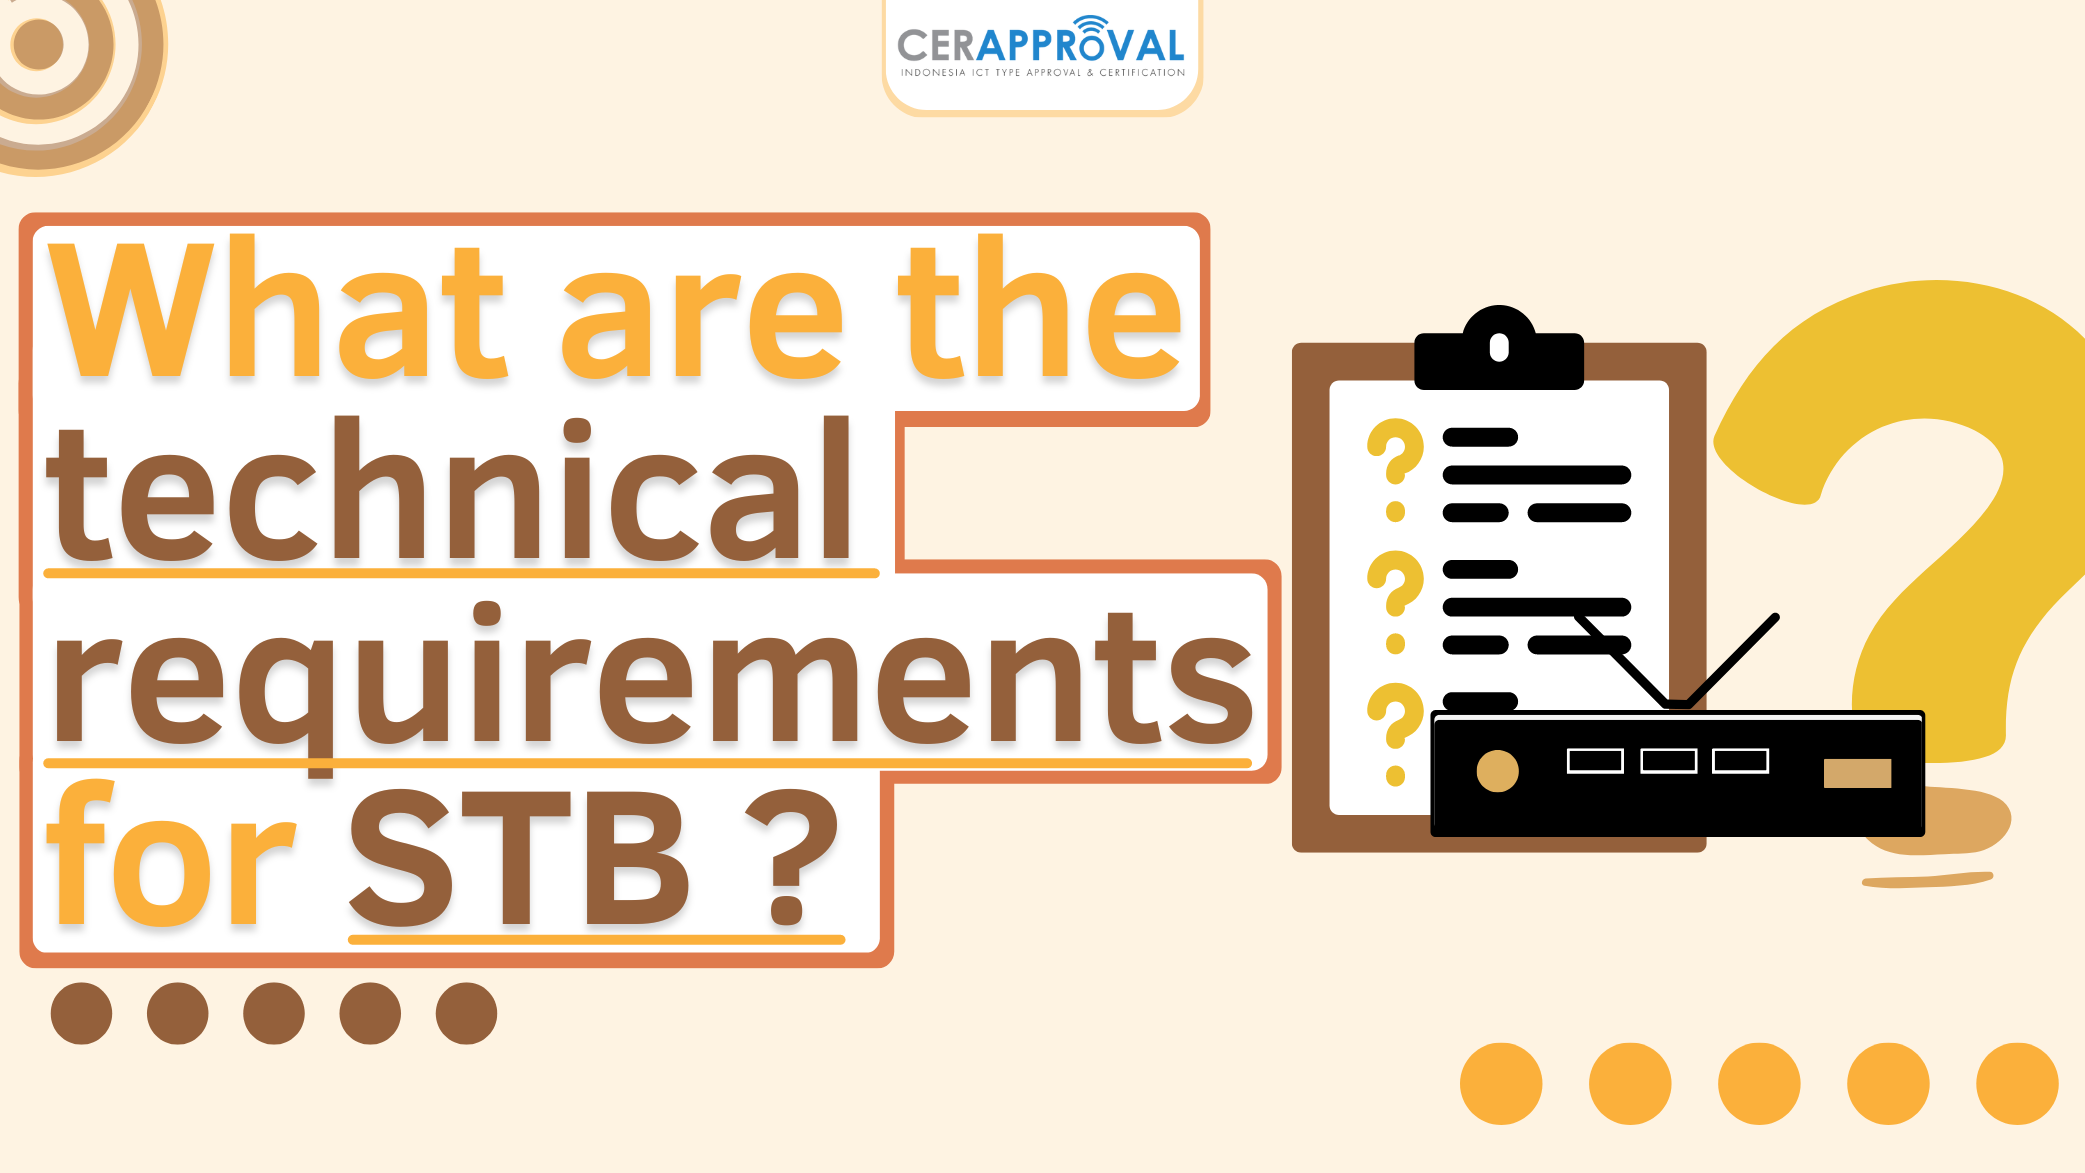 W﻿hat are the technical requirements for STB devices